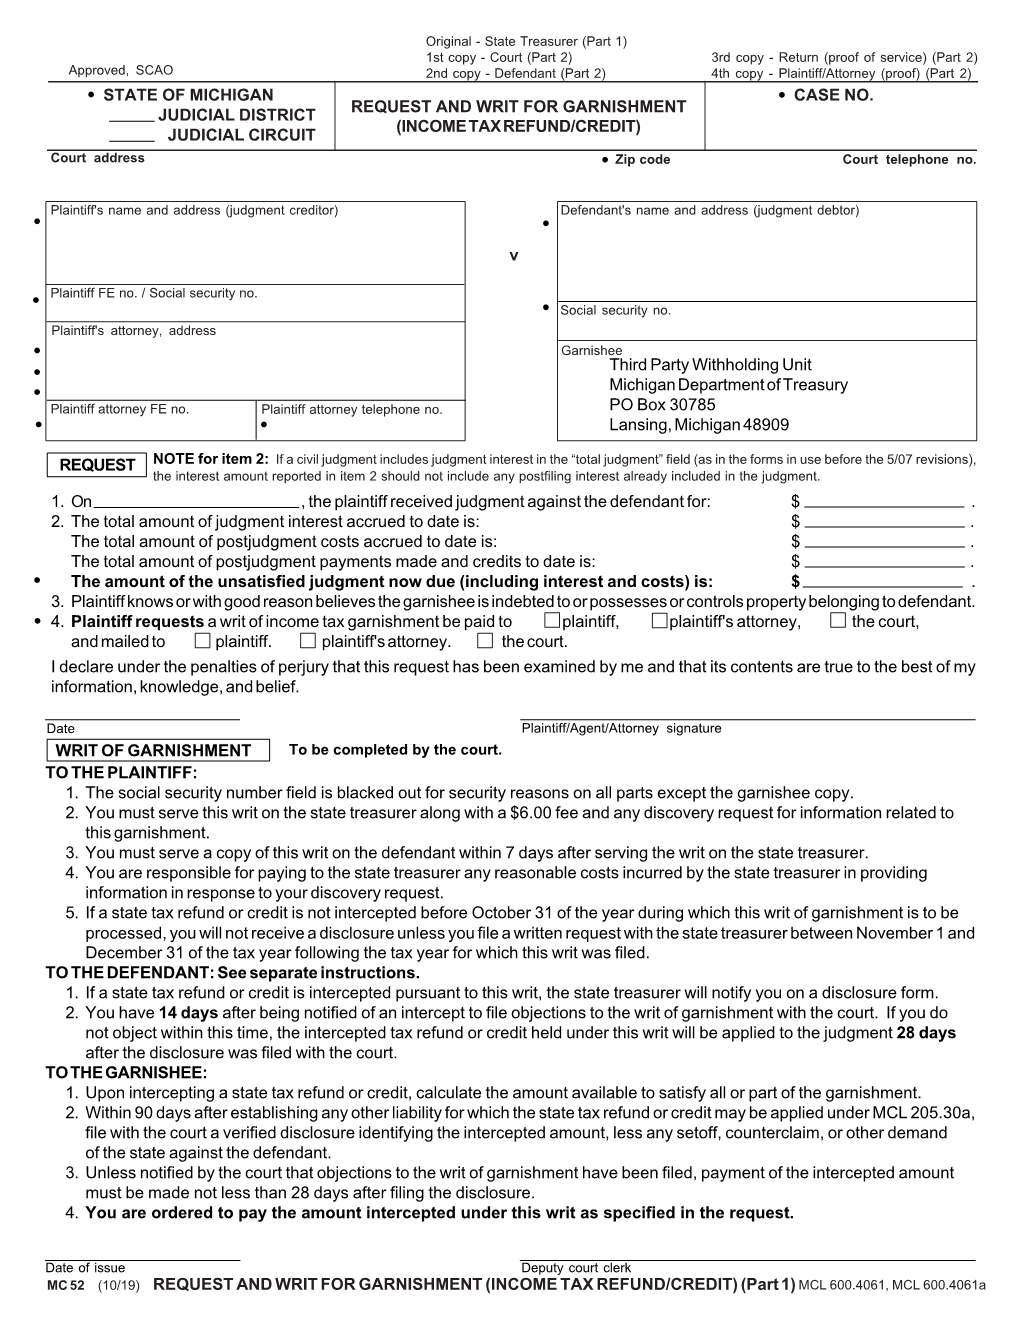 Request and Writ for Garnishment (Income Tax Refund/Credit)